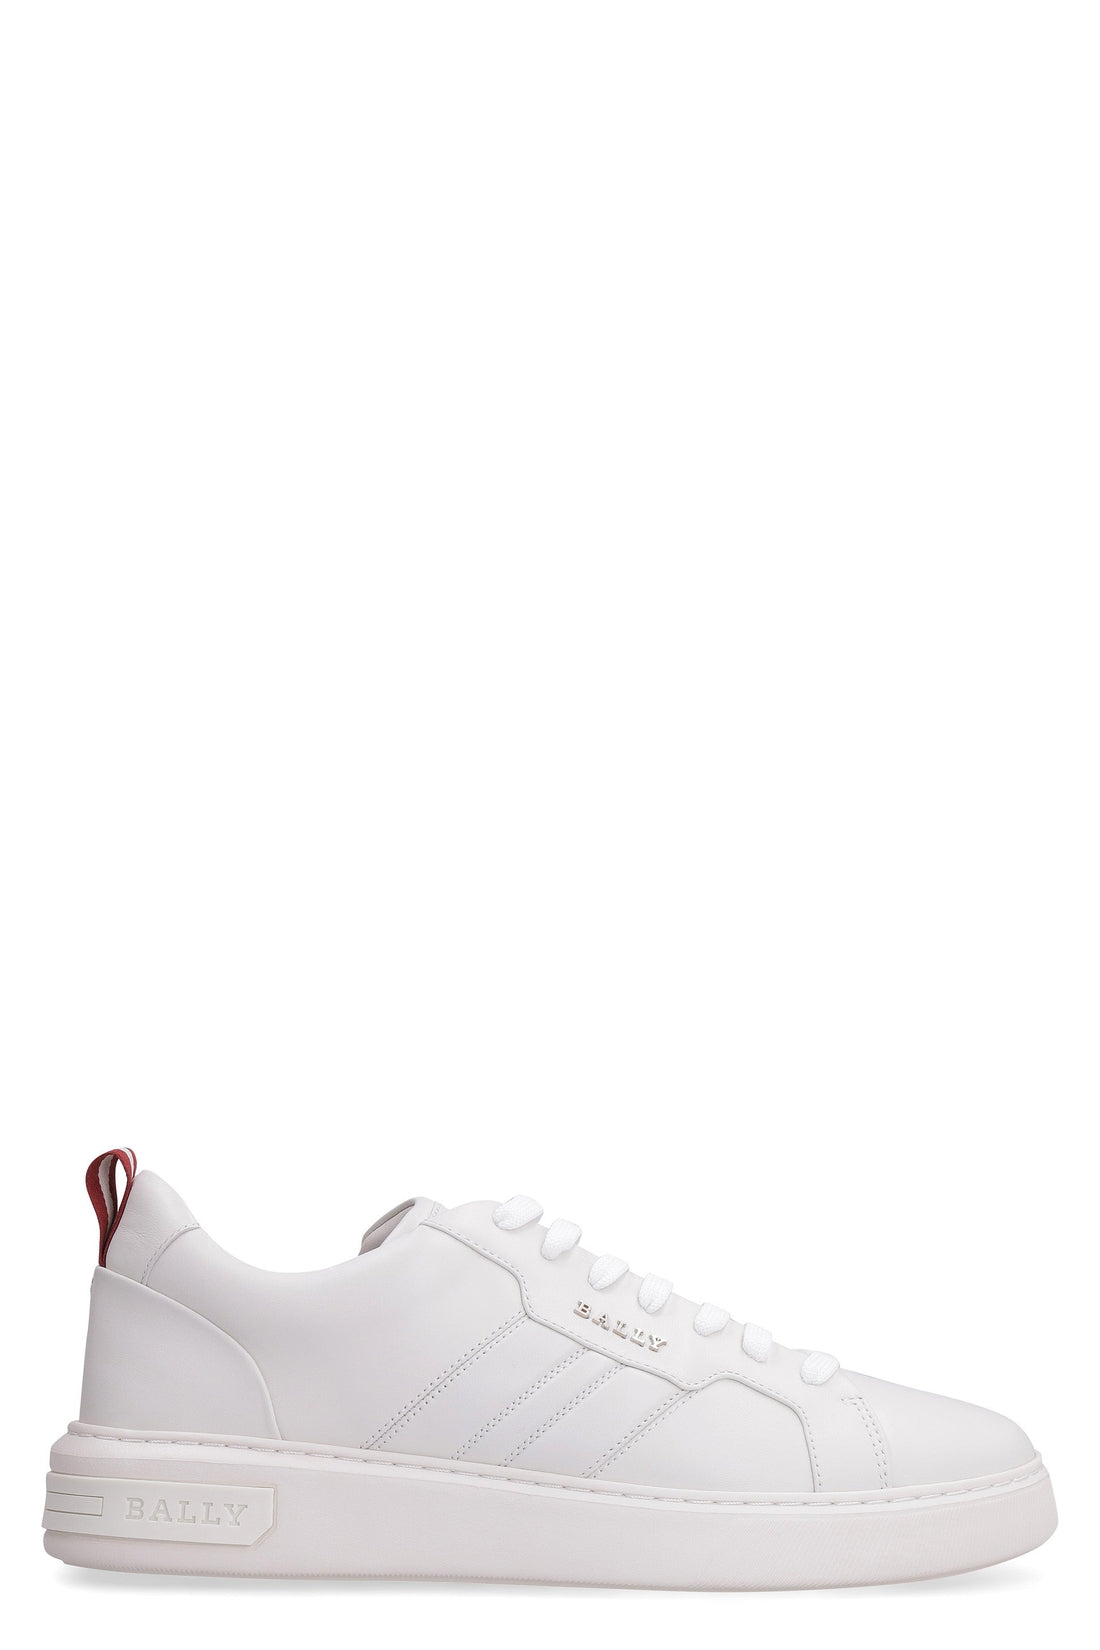 Bally-OUTLET-SALE-Maxim leather low-top sneakers-ARCHIVIST